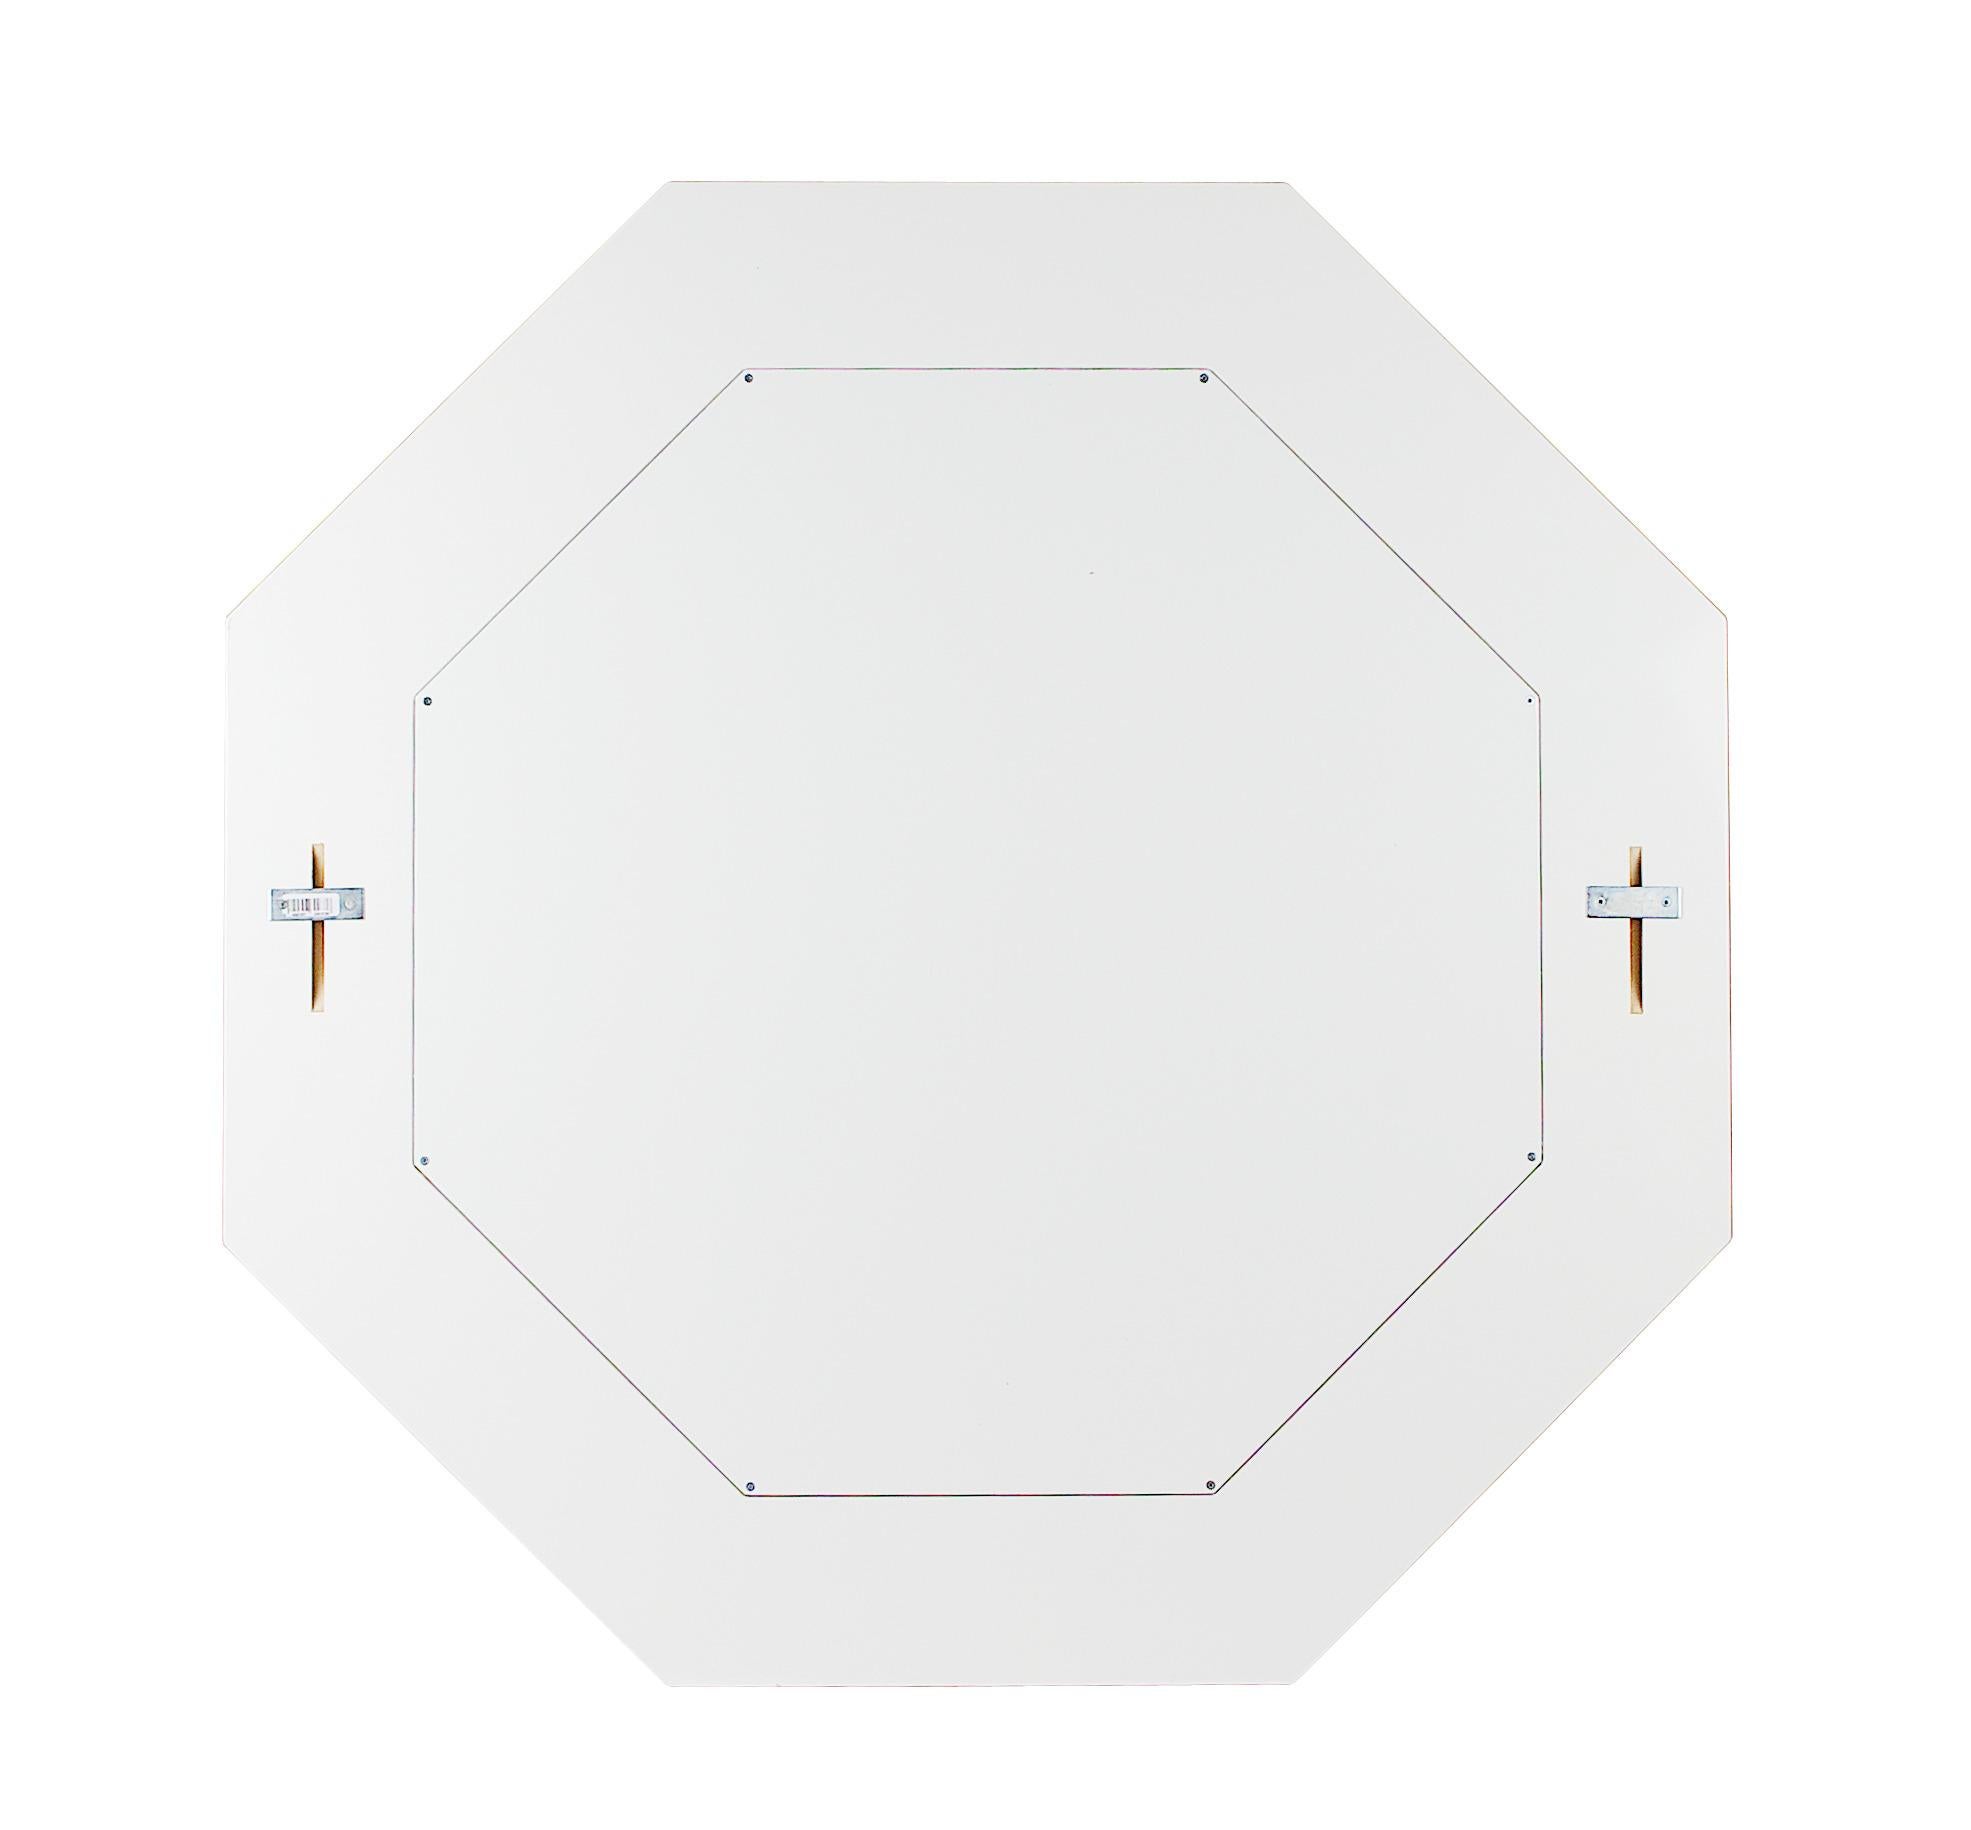 Octagonal shaped white porcelain mirror with black decoration for home decoration.

Details: 
Insurance included: Yes
Finished: Gloss
Height (in): 31.496
Width (in): 31.496
Length (in): 1.181
Sculptor: Dept. Design and